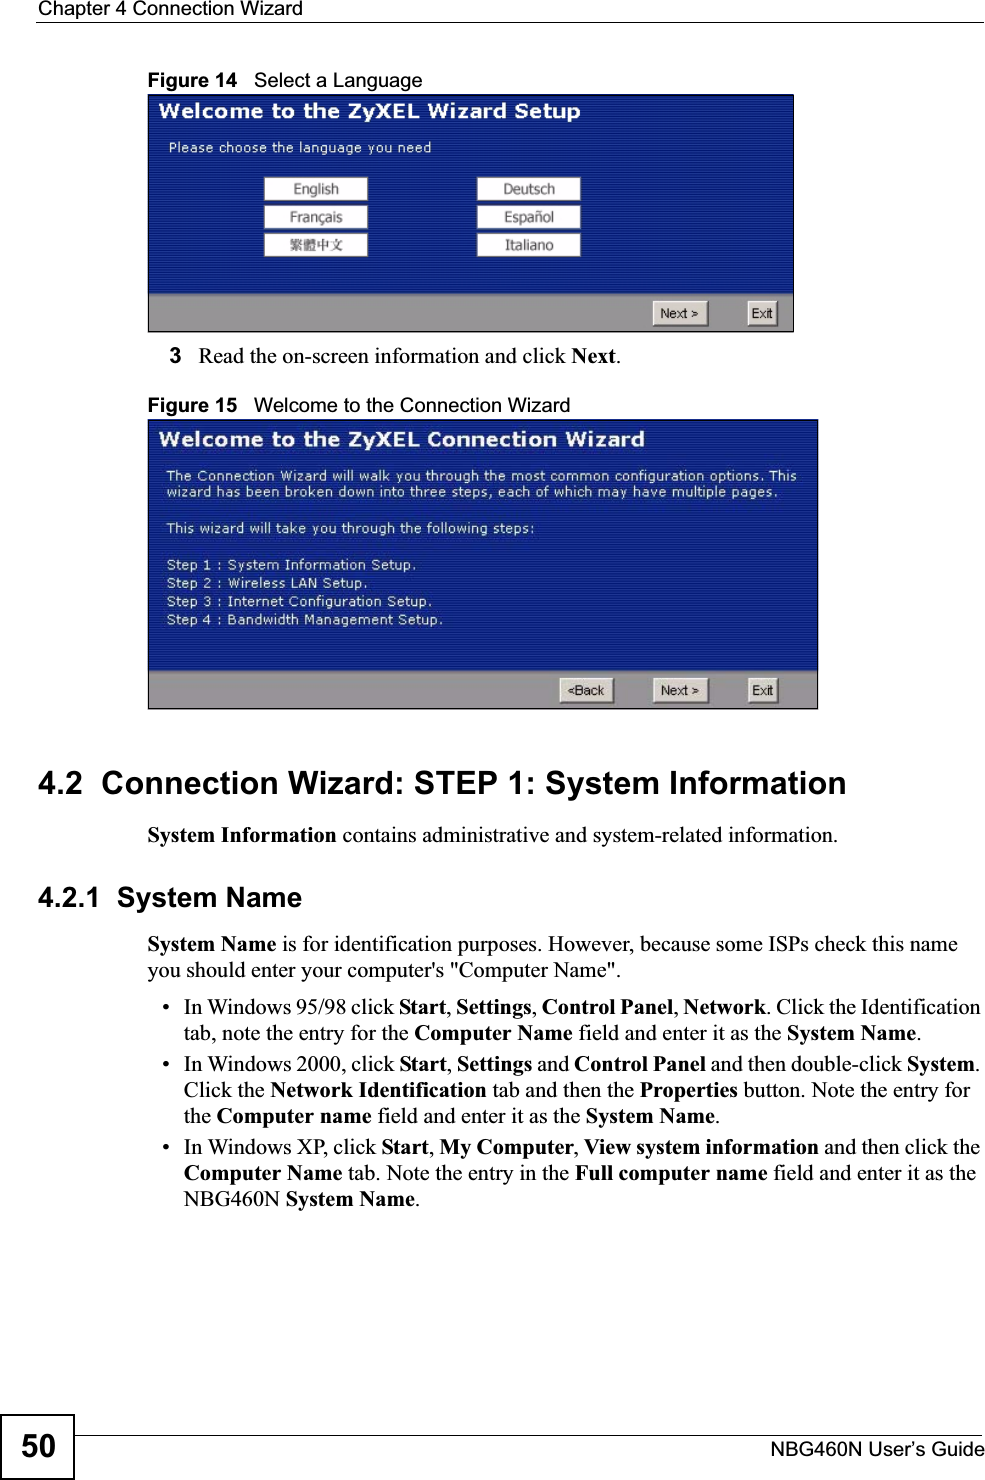 Chapter 4 Connection WizardNBG460N User’s Guide50Figure 14   Select a Language3Read the on-screen information and click Next.Figure 15   Welcome to the Connection Wizard4.2  Connection Wizard: STEP 1: System InformationSystem Information contains administrative and system-related information.4.2.1  System NameSystem Name is for identification purposes. However, because some ISPs check this name you should enter your computer&apos;s &quot;Computer Name&quot;. • In Windows 95/98 click Start, Settings, Control Panel, Network. Click the Identification tab, note the entry for the Computer Name field and enter it as the System Name.• In Windows 2000, click Start, Settings and Control Panel and then double-click System.Click the Network Identification tab and then the Properties button. Note the entry for the Computer name field and enter it as the System Name.• In Windows XP, click Start, My Computer, View system information and then click the Computer Name tab. Note the entry in the Full computer name field and enter it as the NBG460N System Name.